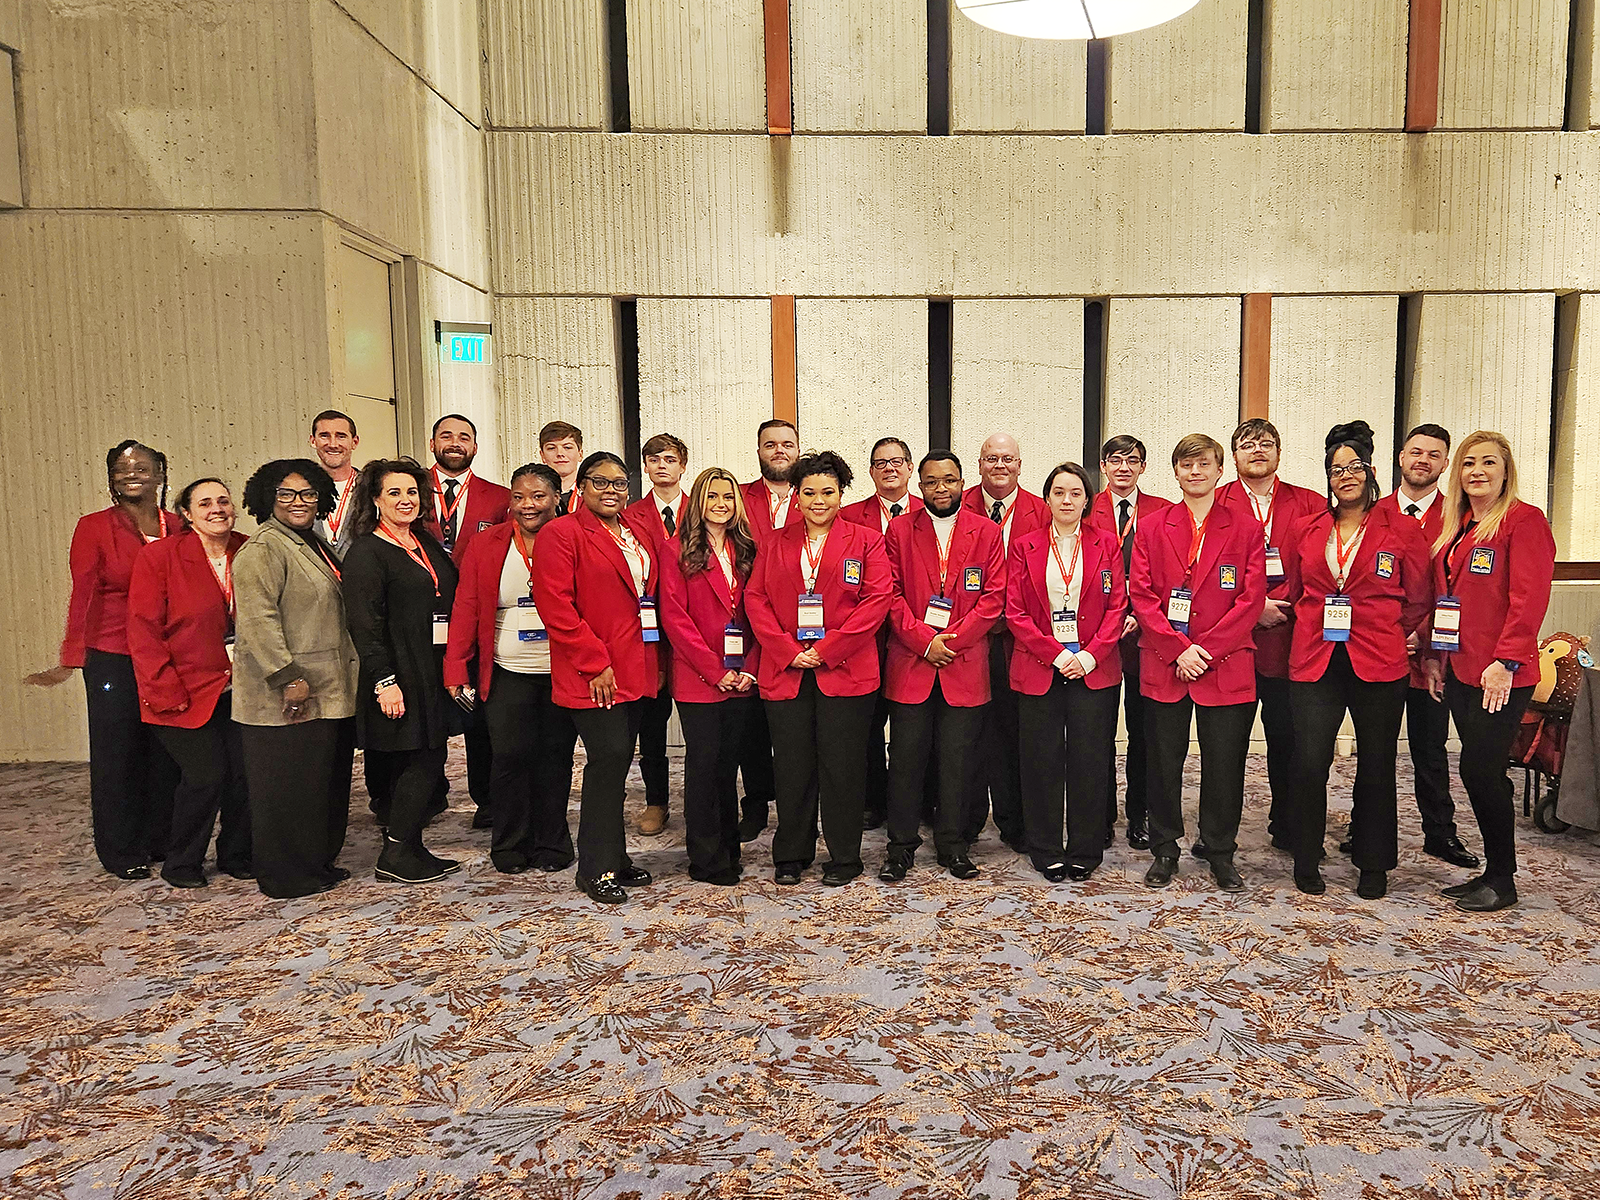 OTC Students Earn Gold, Silver, and Bronze medals at State SkillsUSA Competition